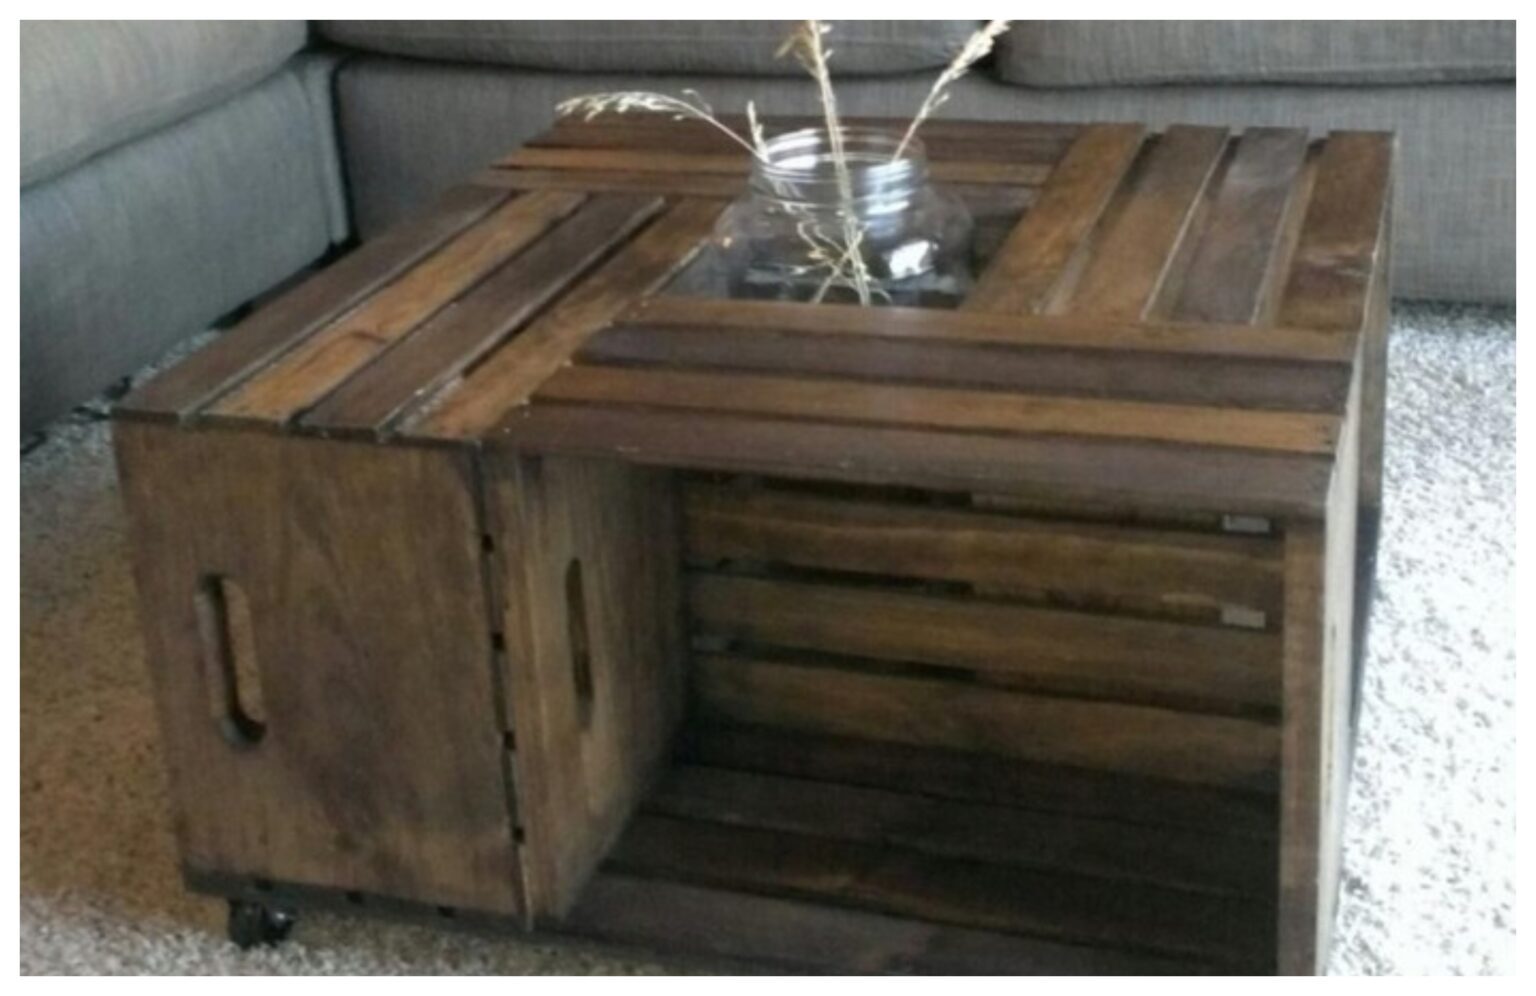 Inexpensive DIY Crate Coffee Table - Your Projects@OBN